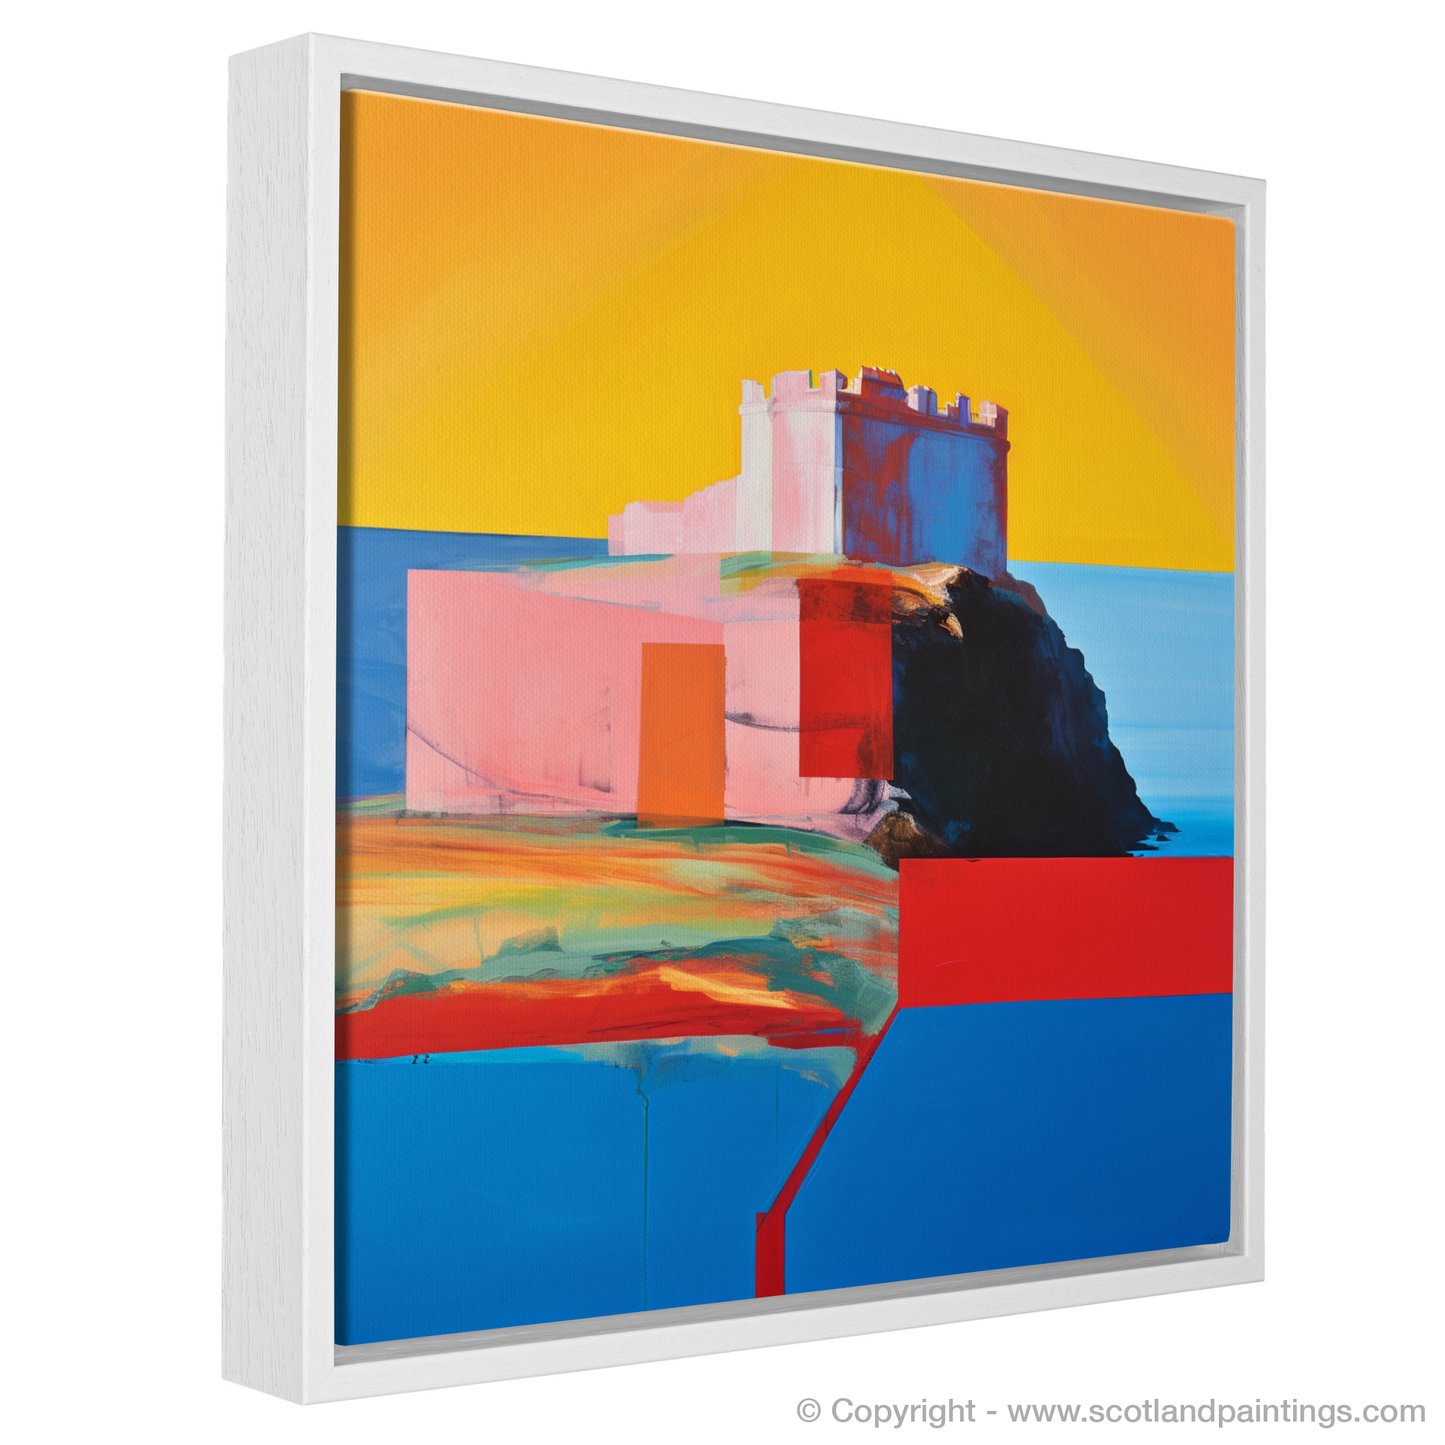 Tantallon Castle Reimagined: A Colour Field Ode to Scottish Majesty